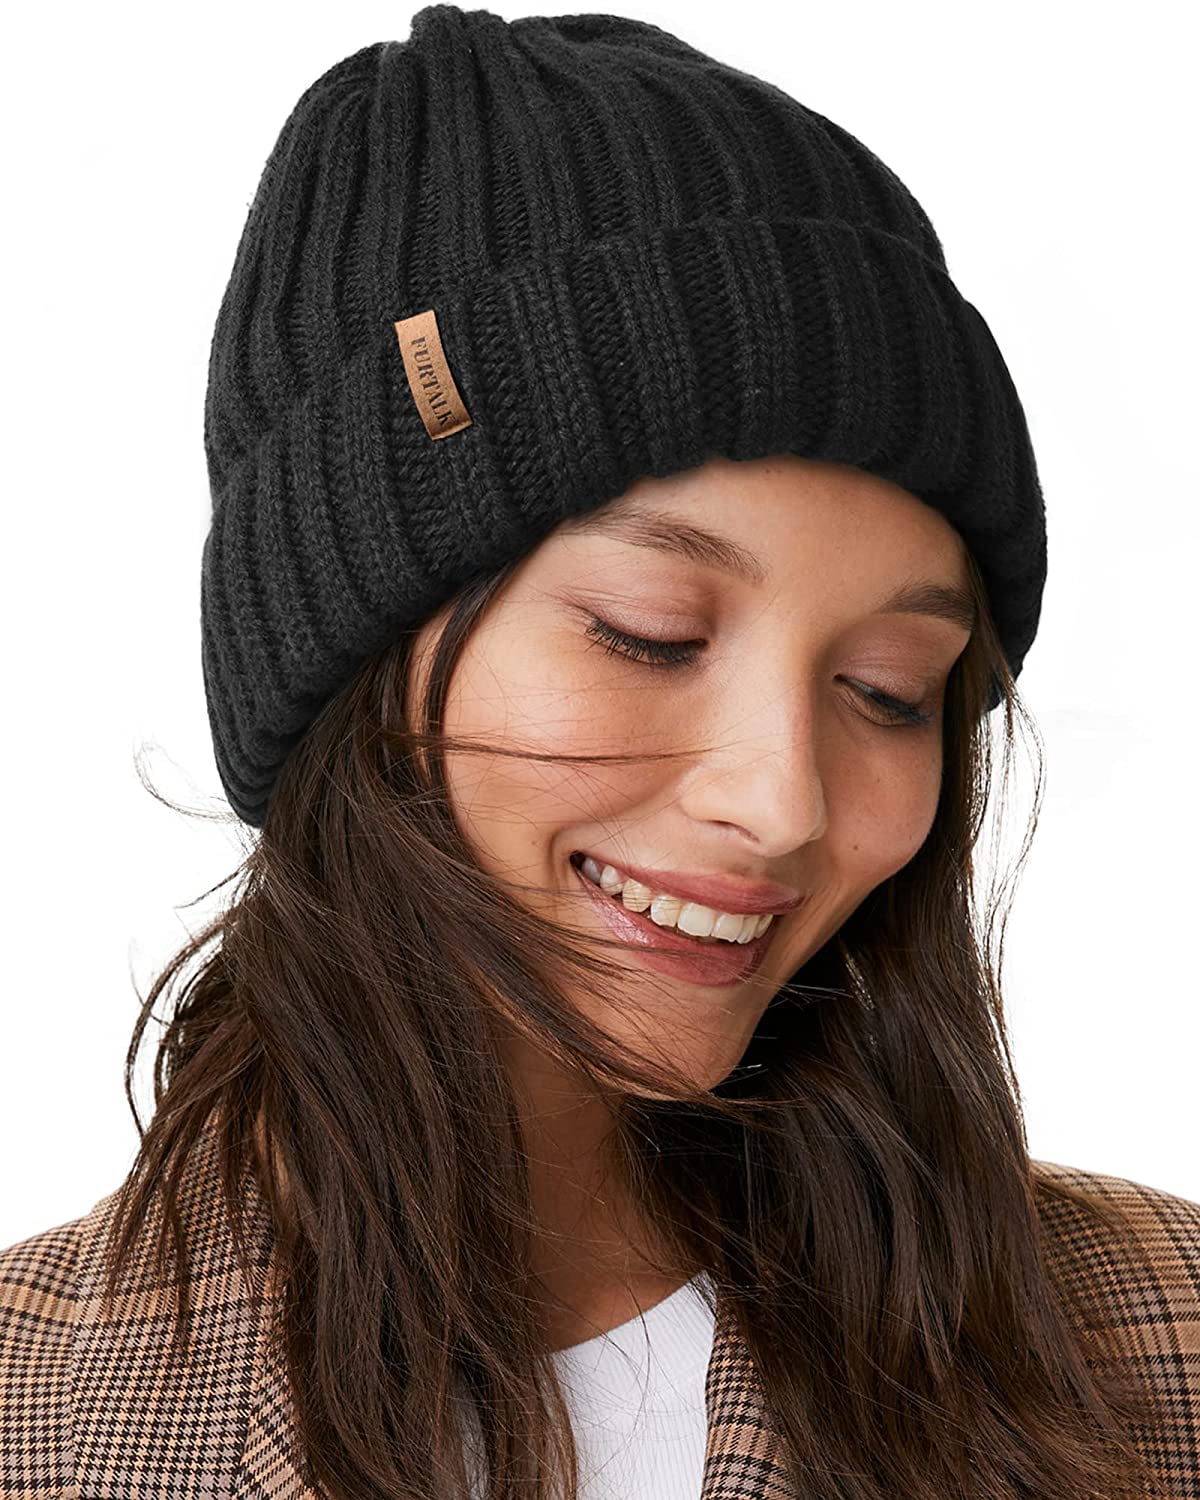 QWZNDZGR Winter for Women Fleece Lined Beanie Cable Knit Chunky Beanies Womens Cap -